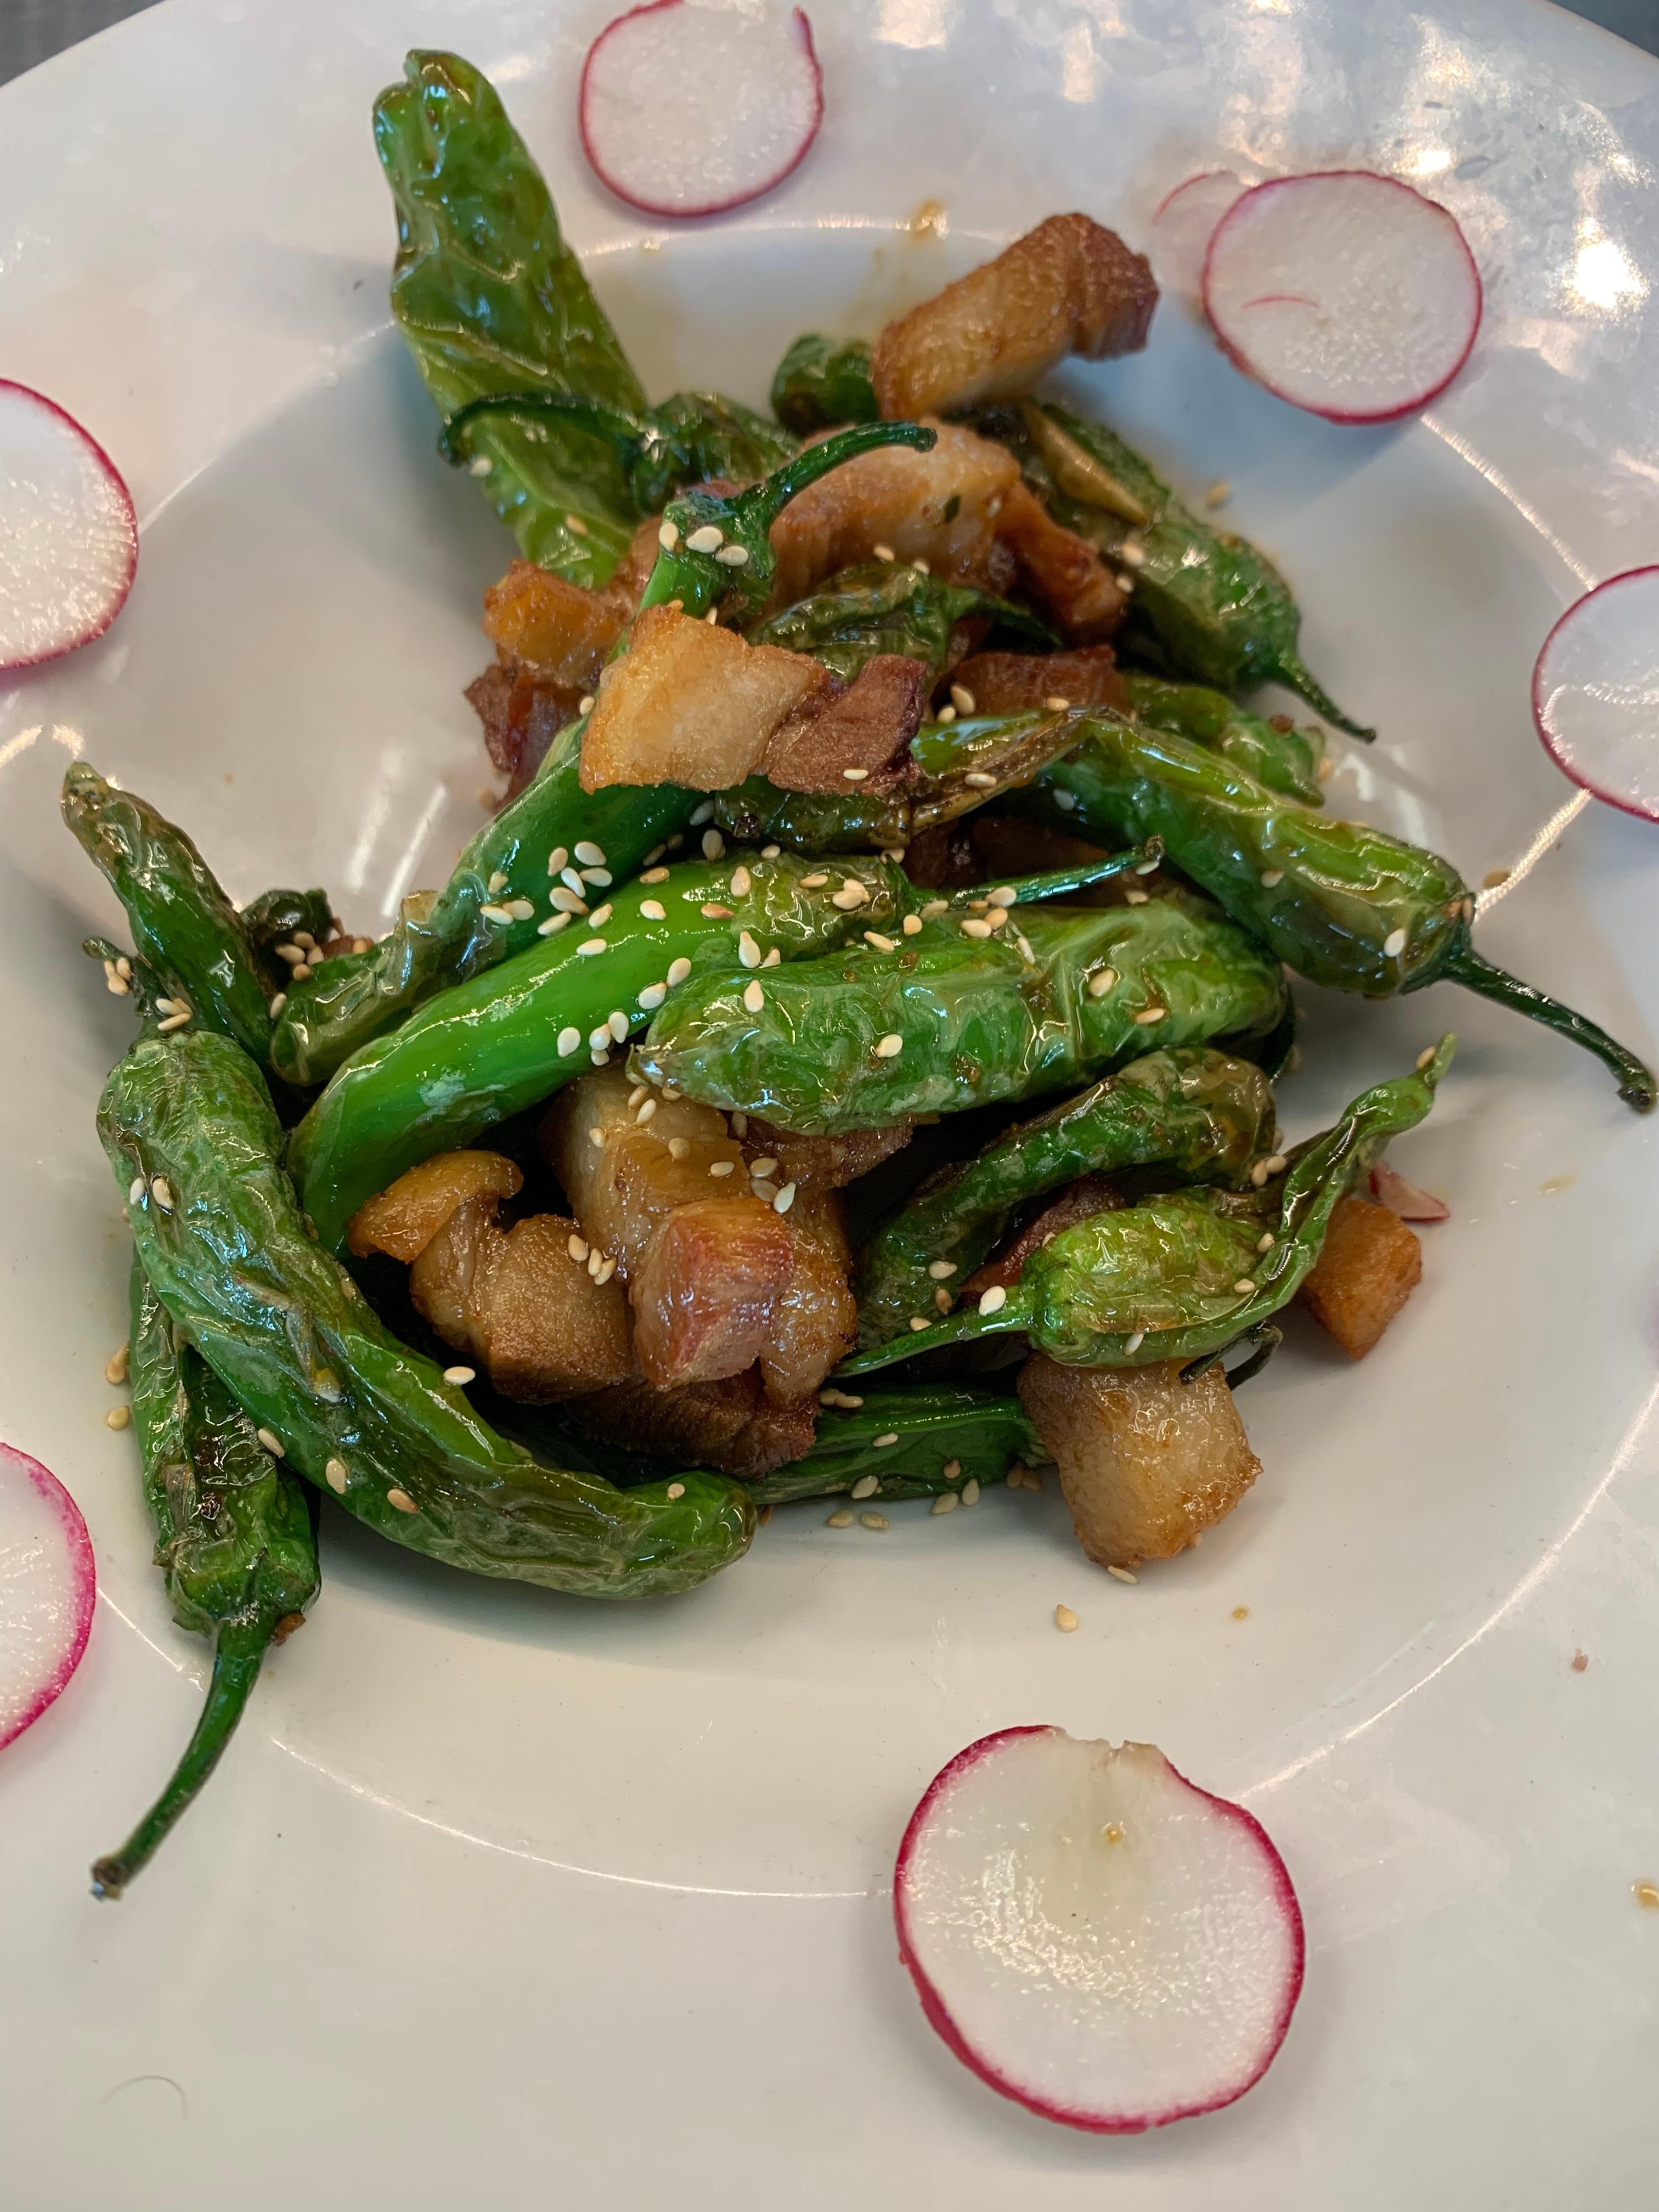 Ginger Soy Shishito Peppers